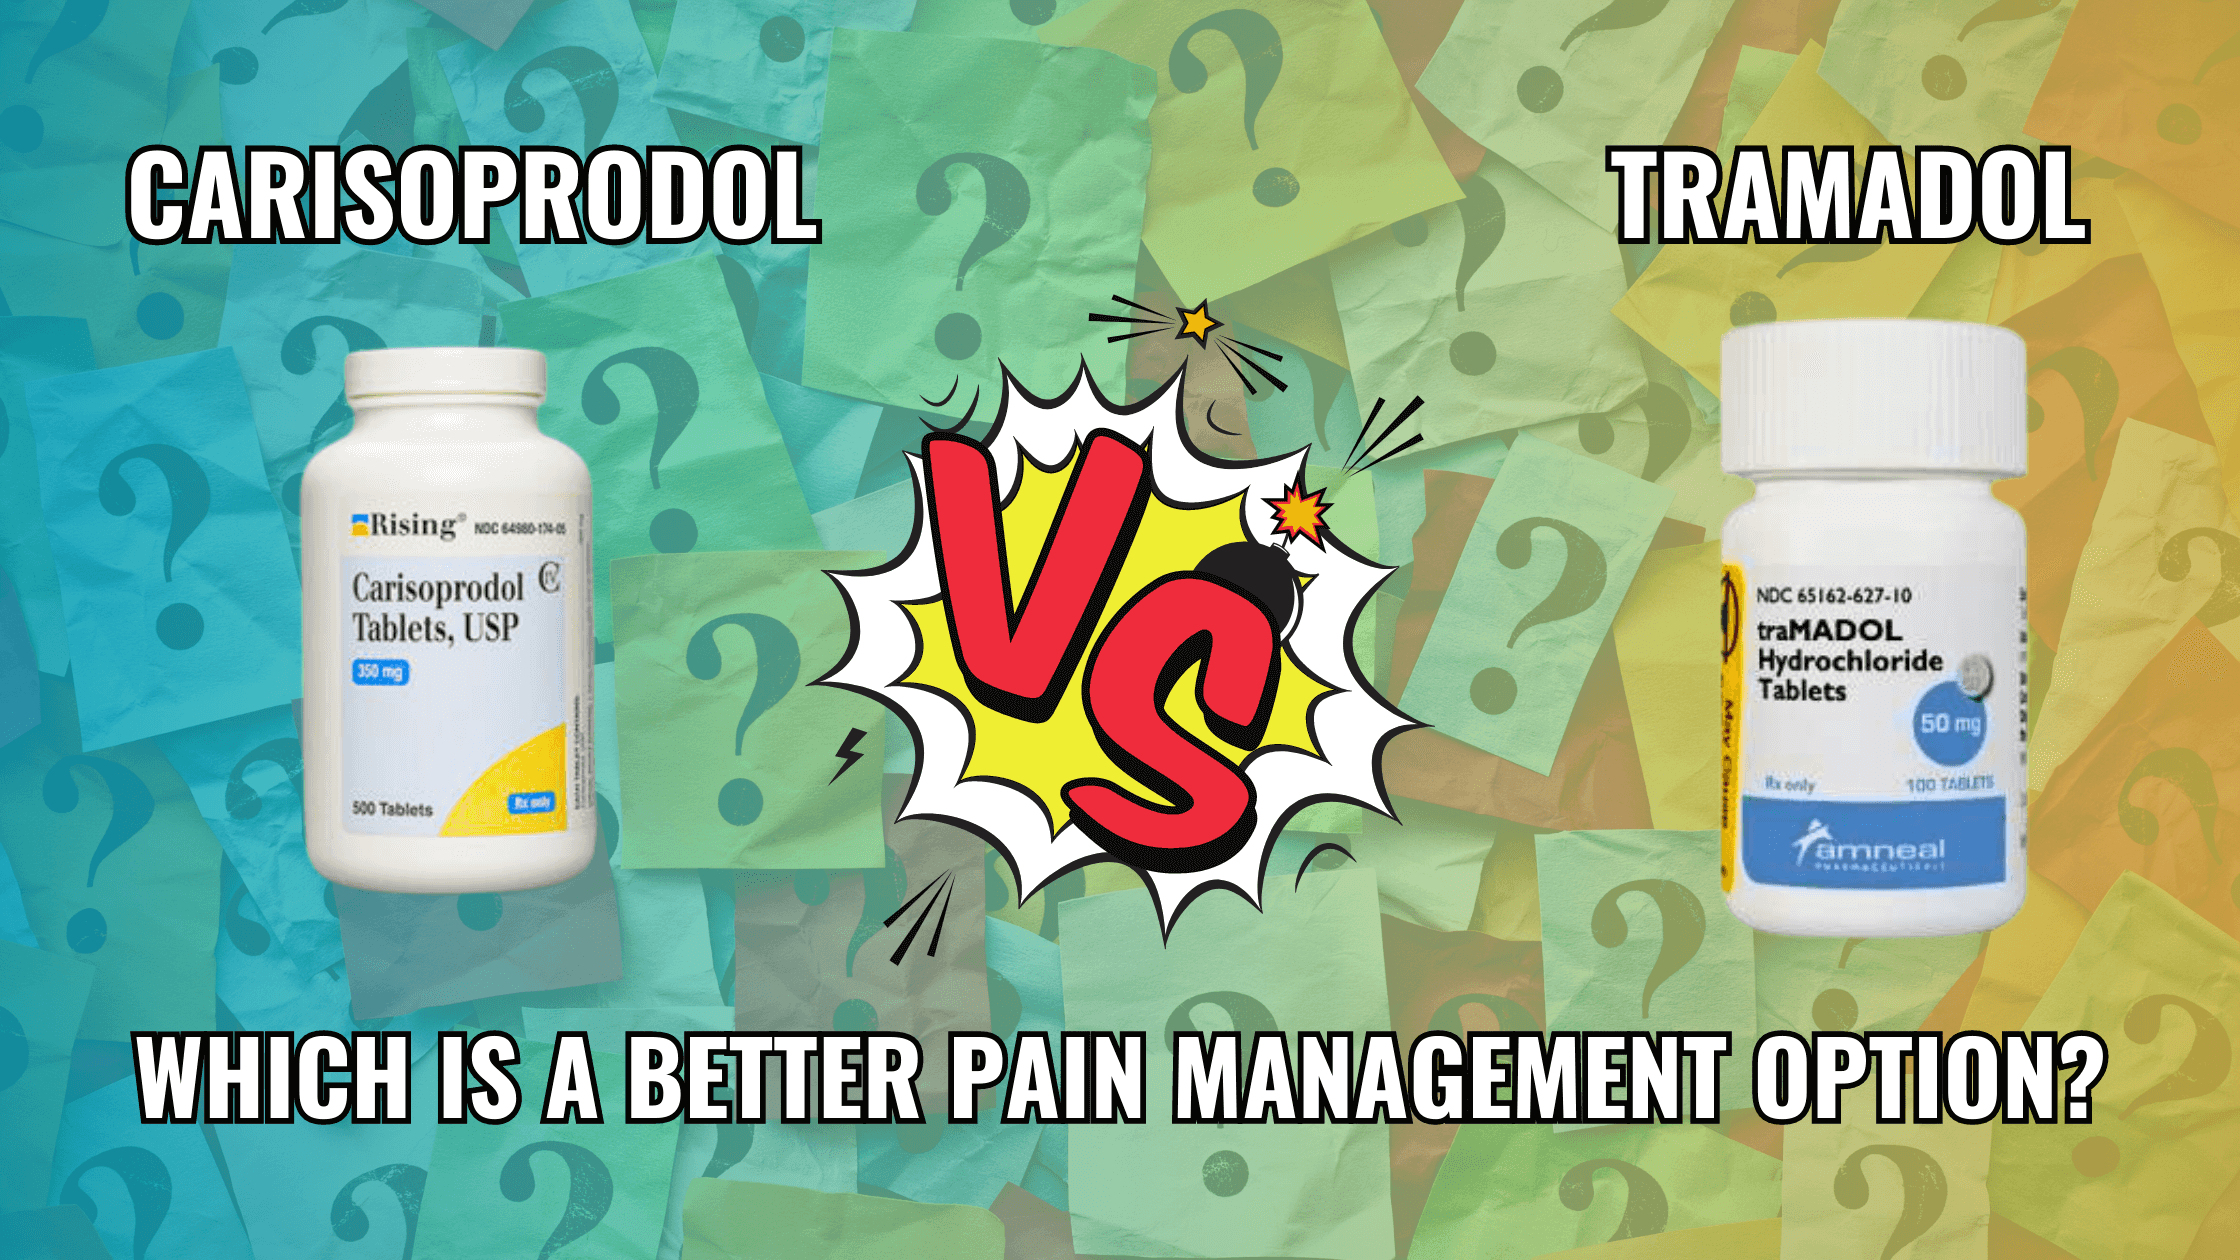 Carisoprodol Vs. Tramadol: Which Is A Better Pain Management Option?